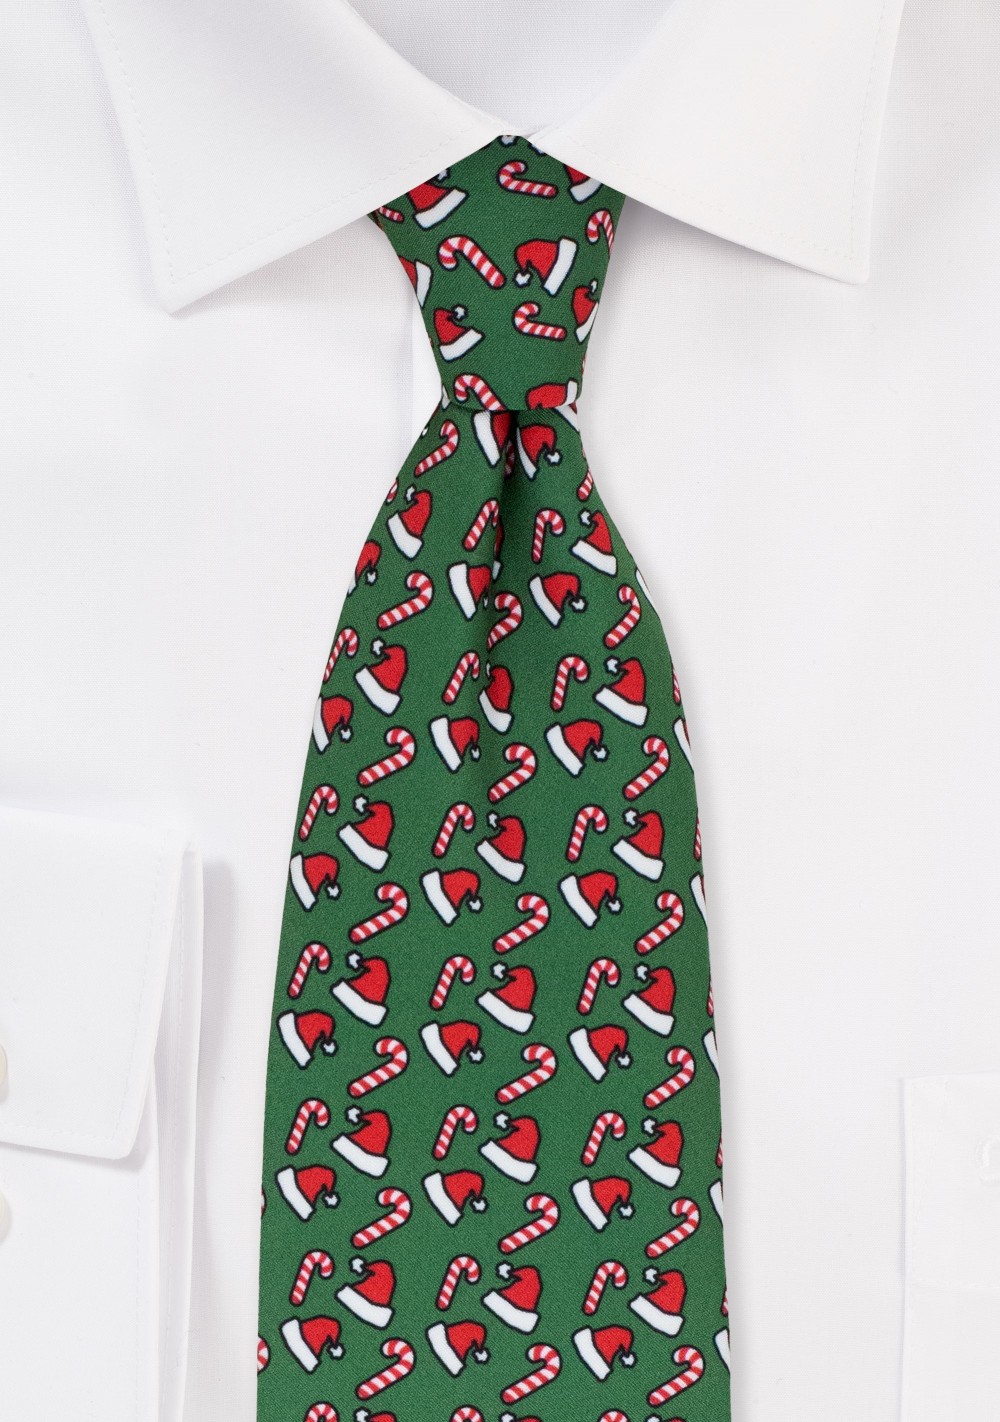 Santa Hat and Candy Cane Print Tie in Green